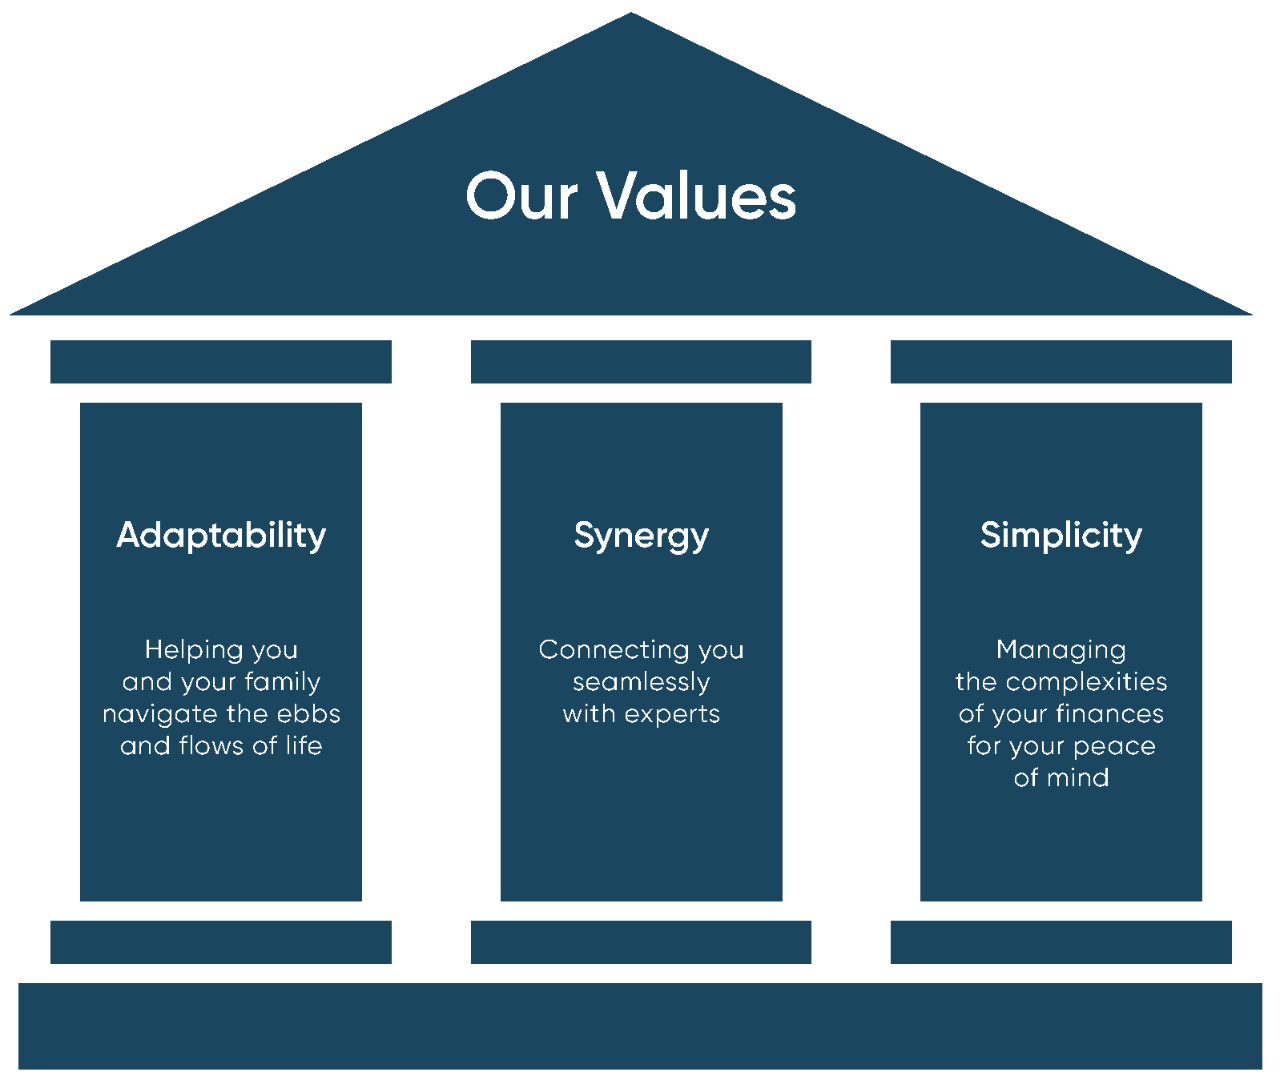 Three pillars of our values for wealth management; Adaptability, Synergy, Simplicity.